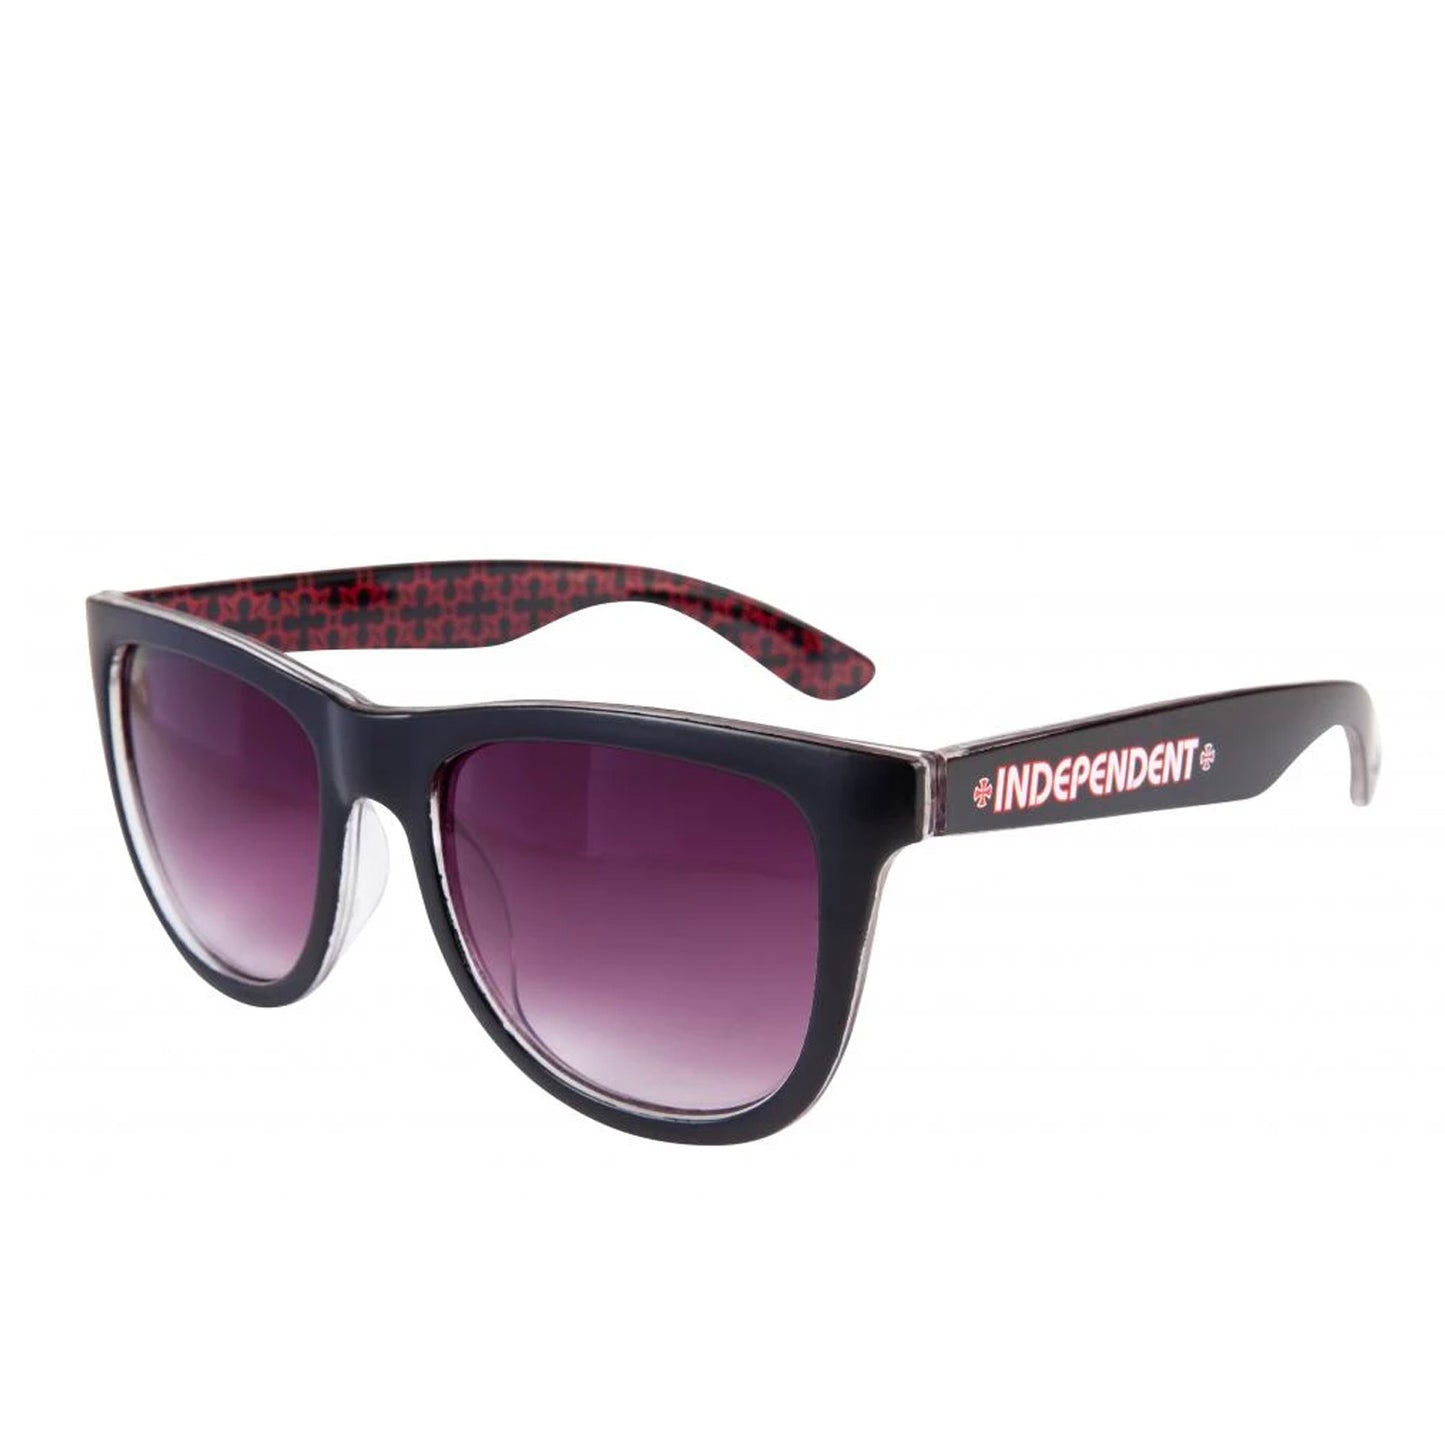 Independent Repeat Cross Sunglasses Black / Red - Prime Delux Store